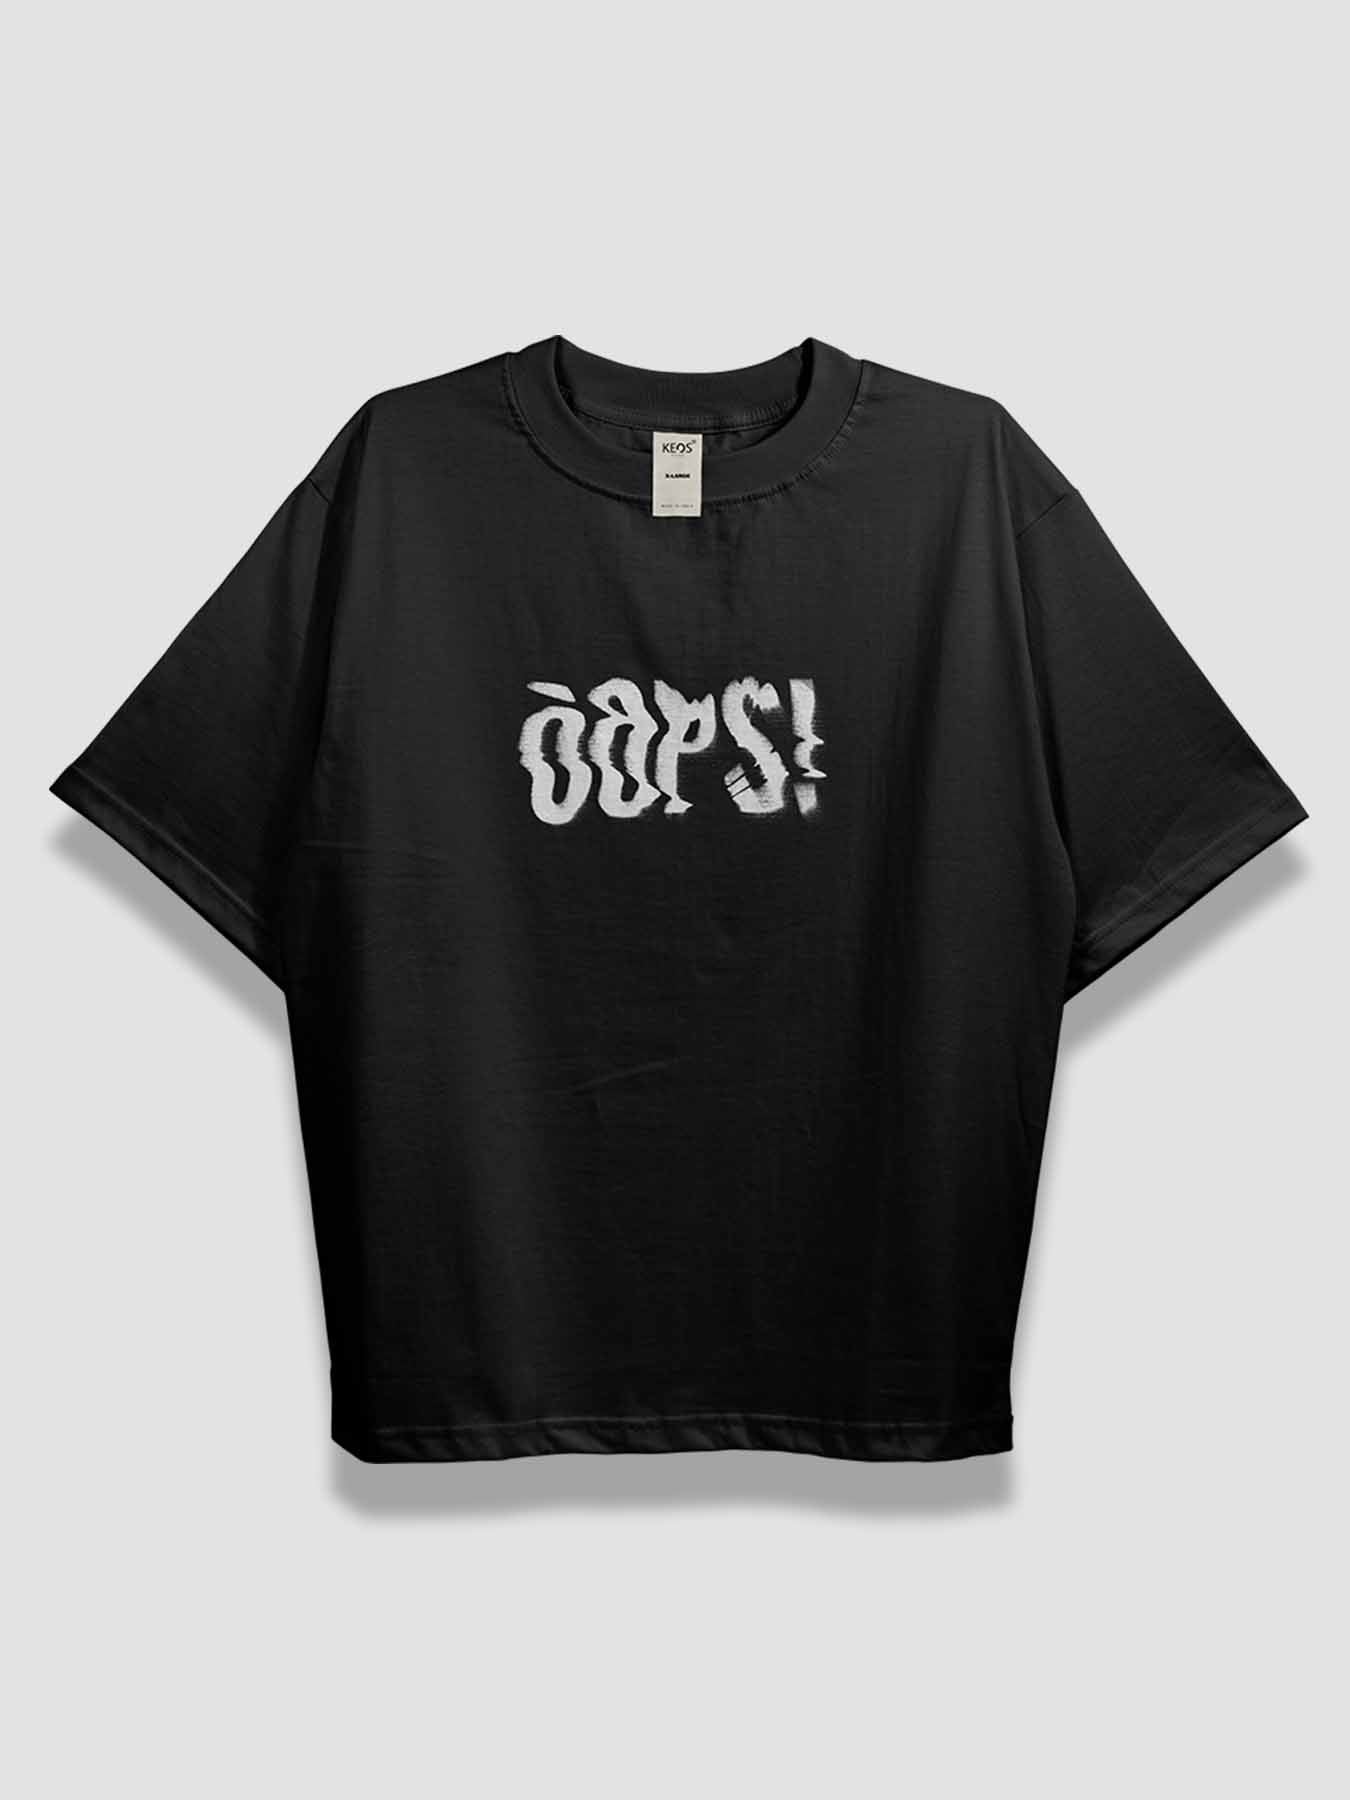 Oops! Urban Fit Oversized T-shirt - keos.life